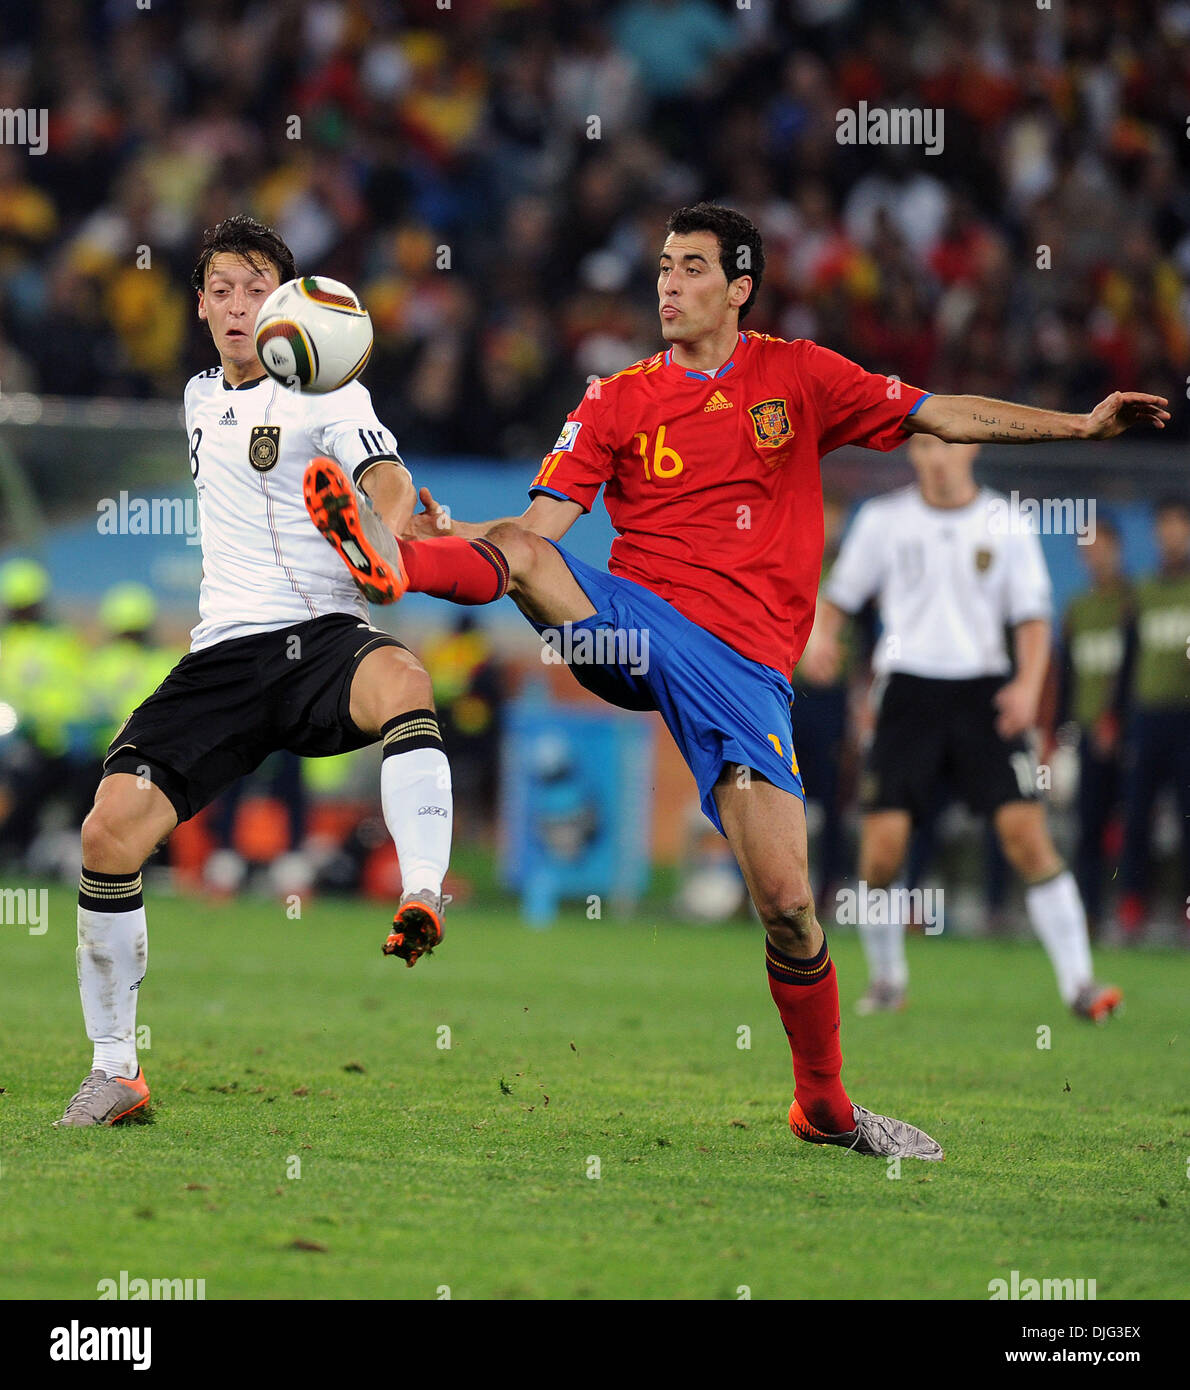 July 07, 2010 - Durban, South Africa - Mesut Oezil of Germany fights for the ball with Sergio Busquets of Spain during the 2010 FIFA World Cup Semi Final soccer match between Germany and Spain at Princess Magogo Stadium on July 7, 2010 in Durban, South Africa. (Credit Image: © Luca Ghidoni/ZUMApress.com) Stock Photo